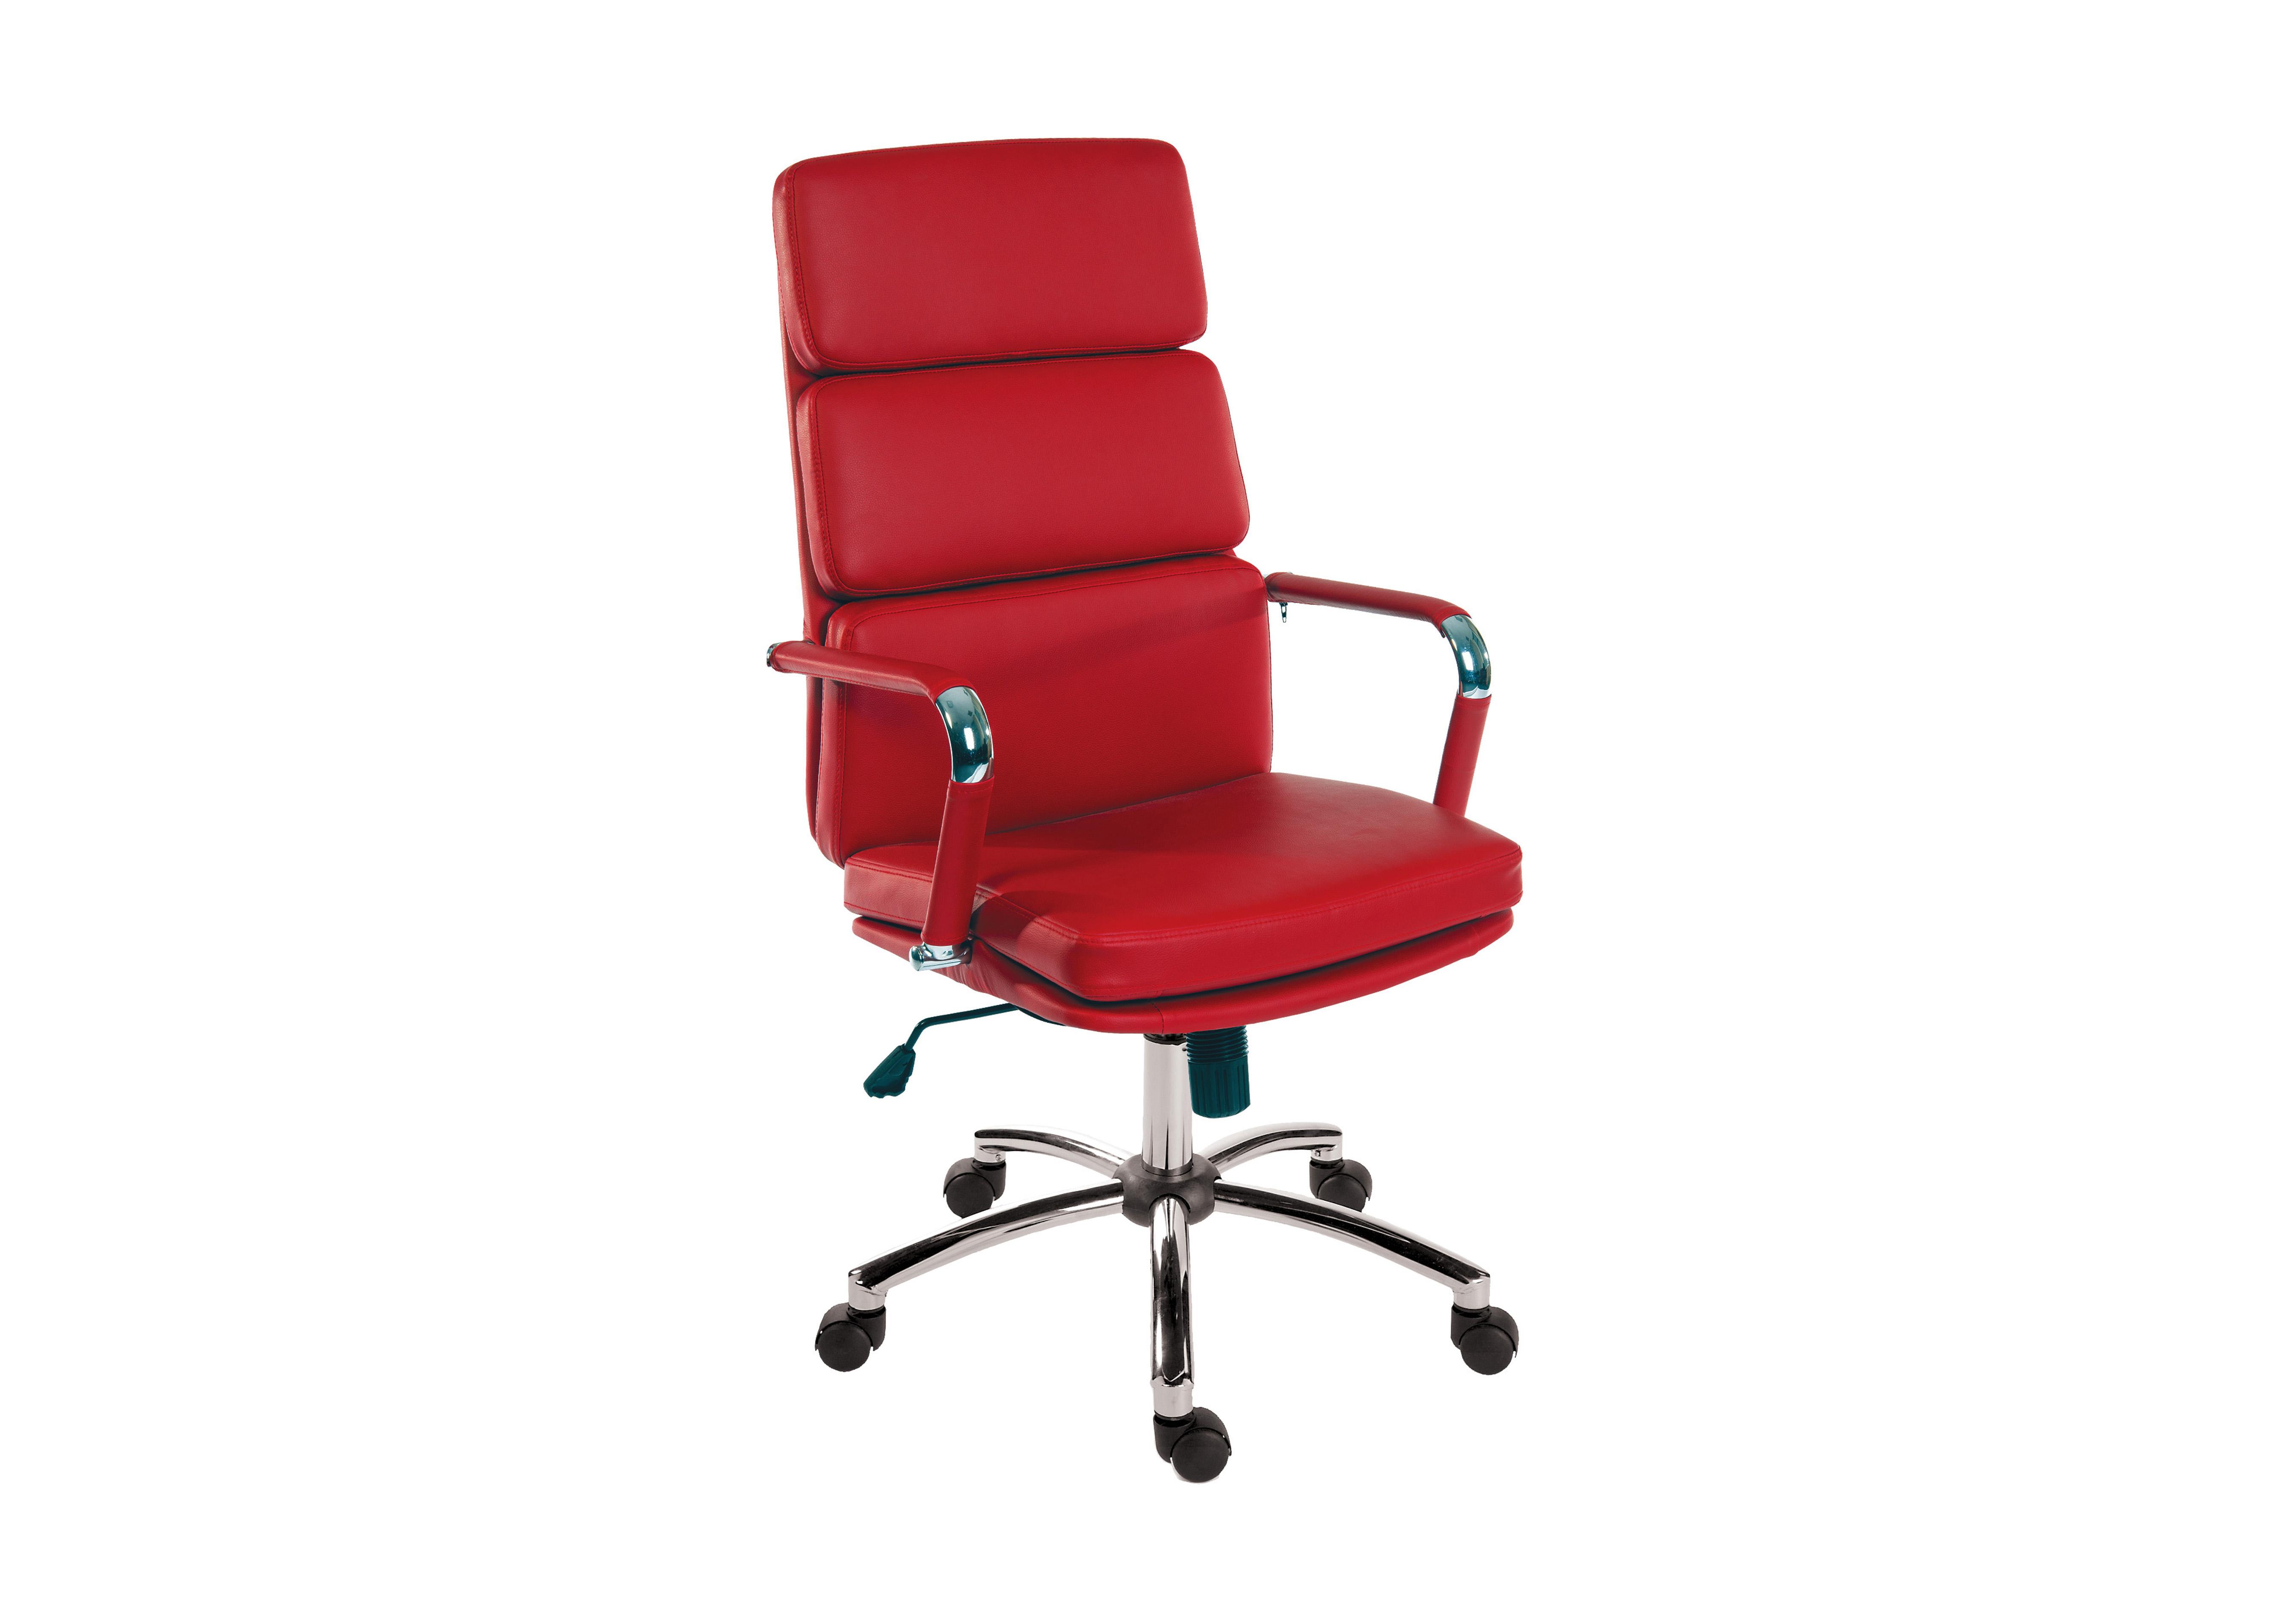 East River Pier 15 Office Chair in Red on Furniture Village